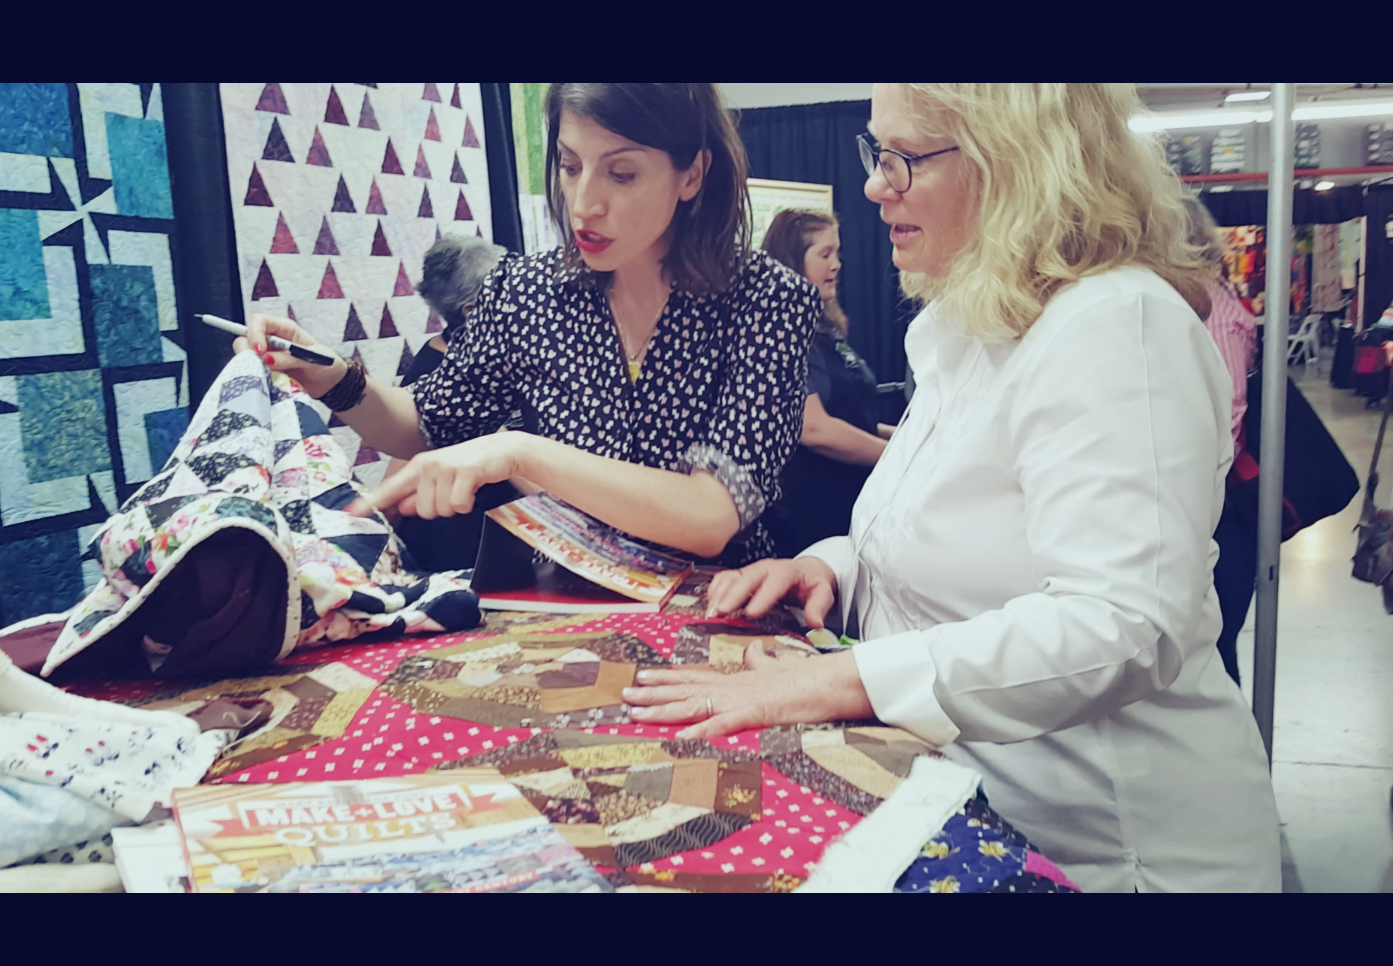 Book-signin' and quilt-rappin' in Portland today. Photo: Amber at EE Schenck.